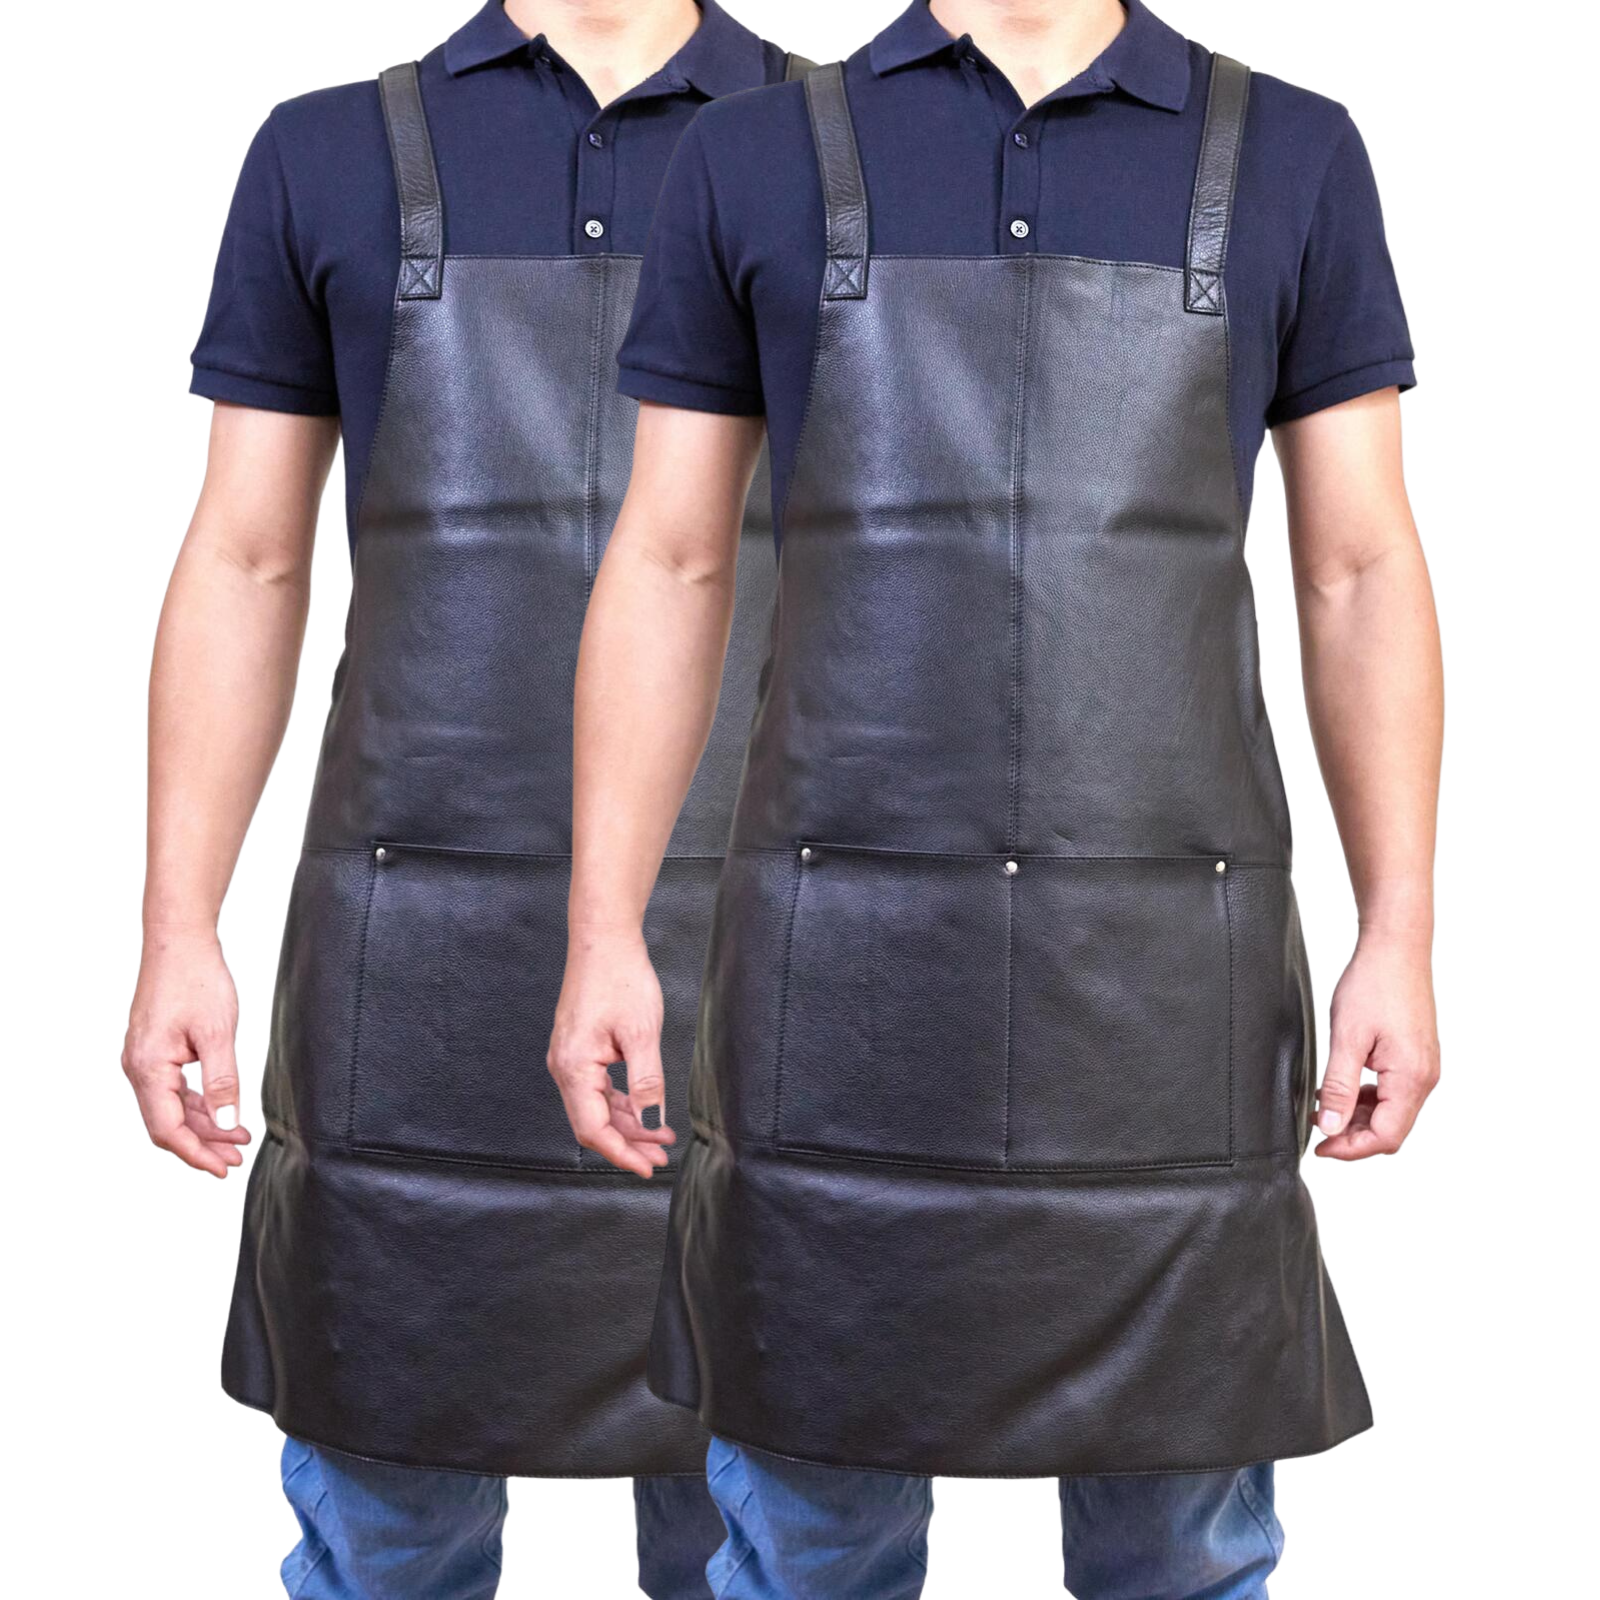 2x  Professional Leather Apron Butcher Woodwork Barber Chef - Black